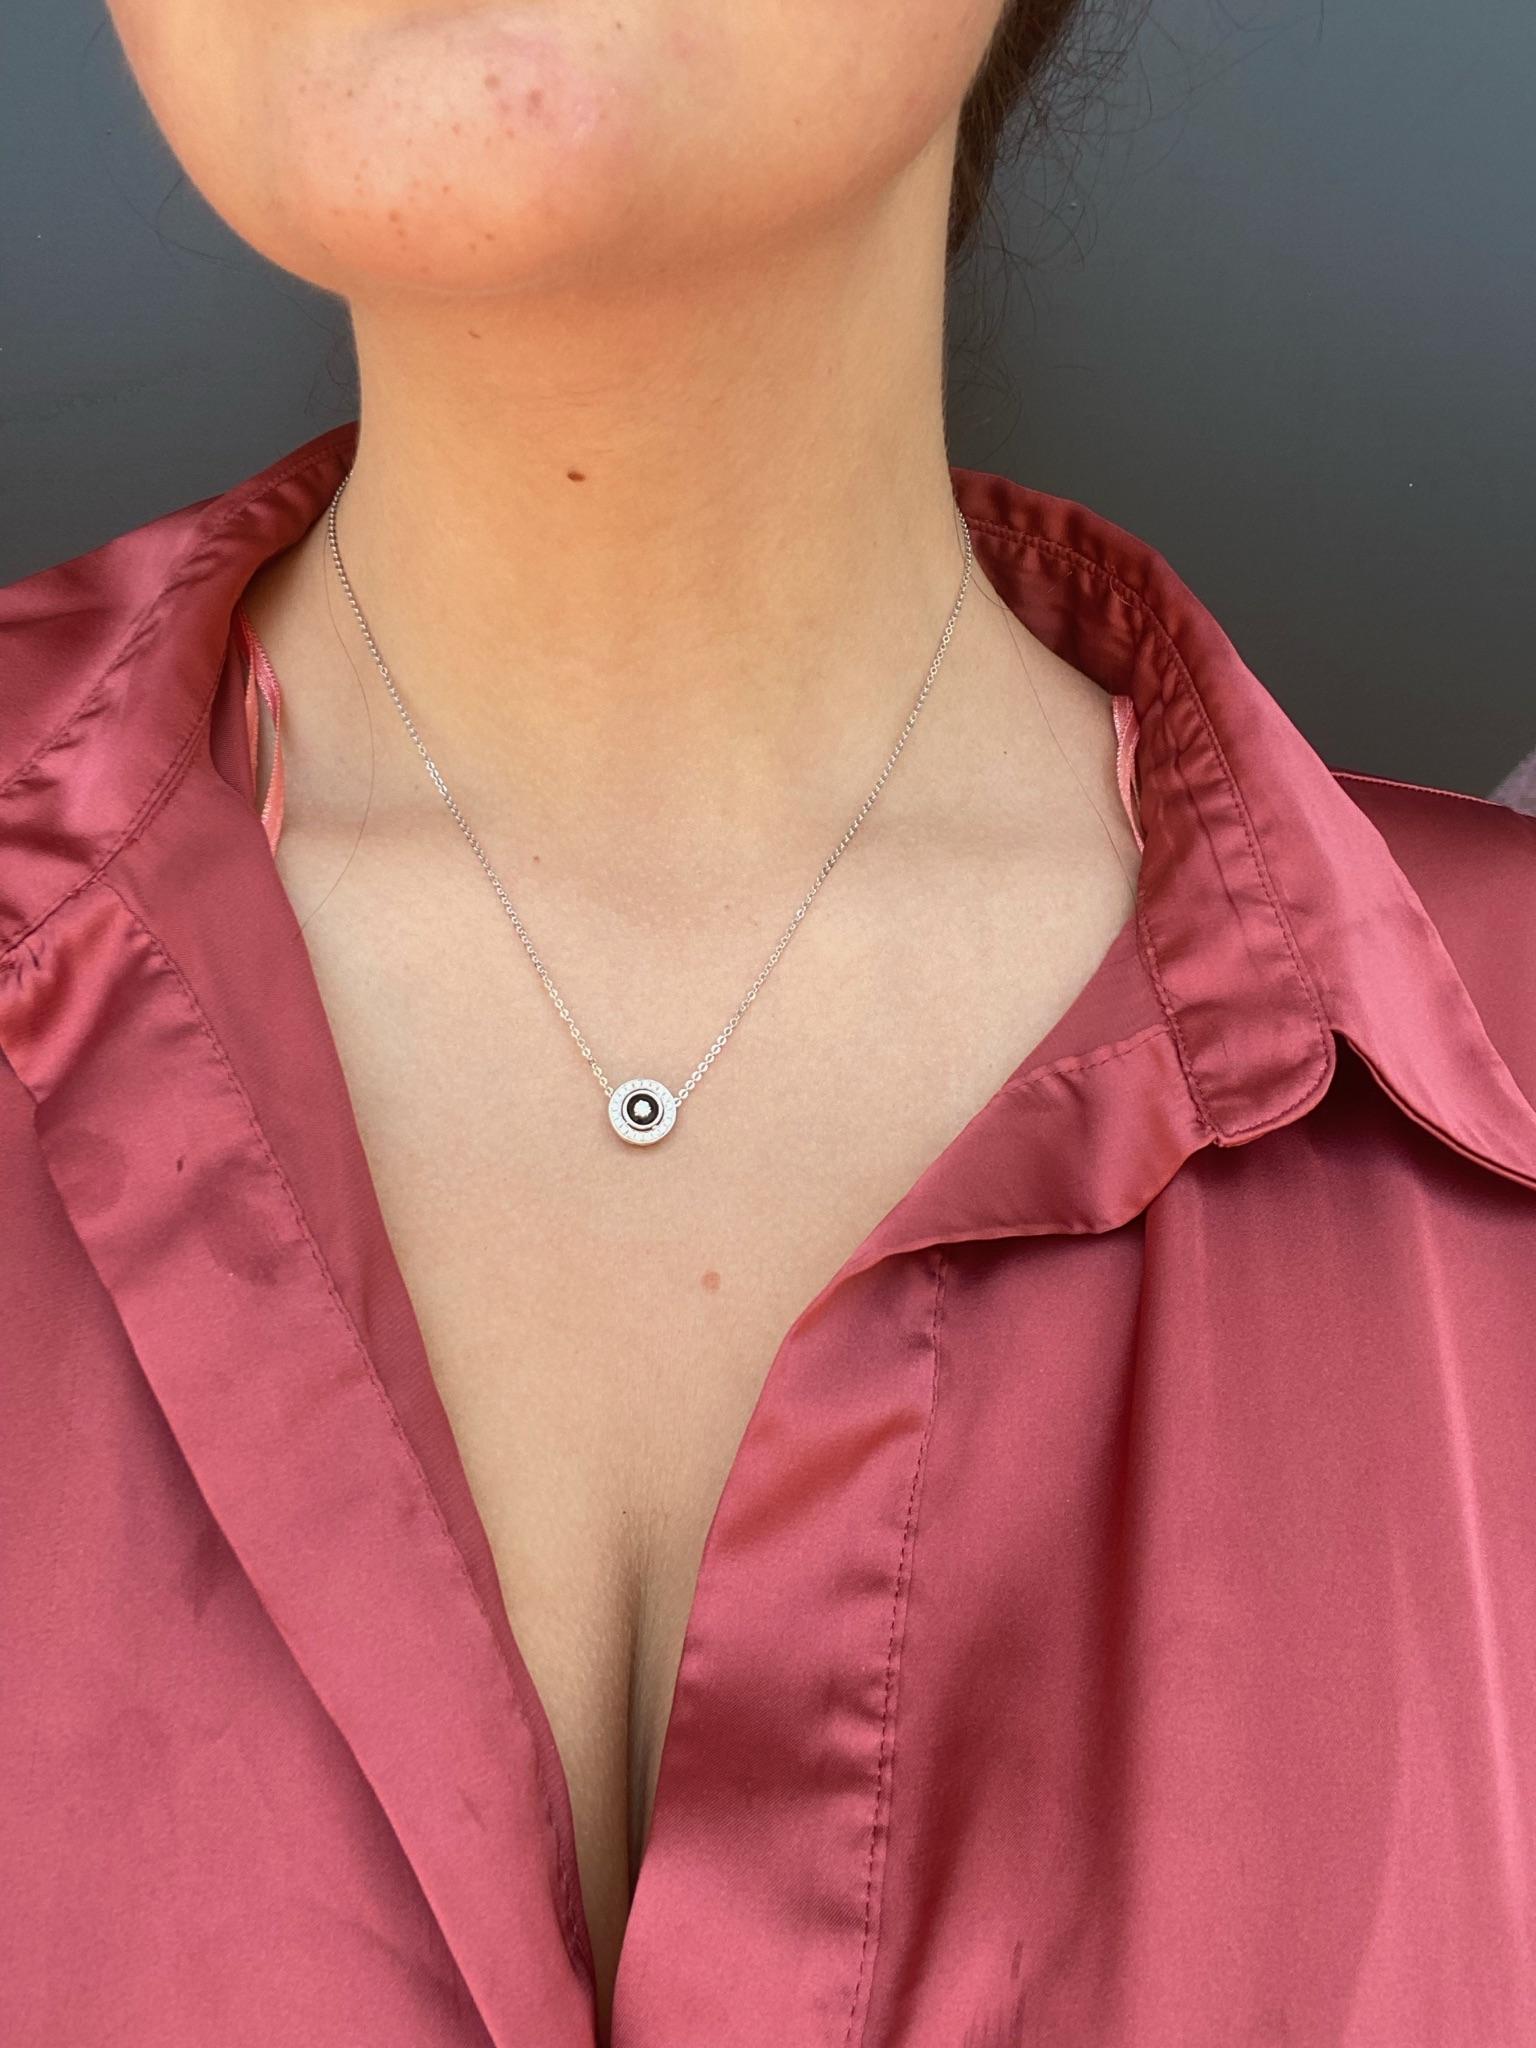 Necklace White Gold 14 K (Matching Ring and two models of Earrings)
Diamond  3-RND 57-0,08-4/5

Weight 2.42 grams
Size 45


With a heritage of ancient fine Swiss jewelry traditions, NATKINA is a Geneva based jewellery brand, which creates modern